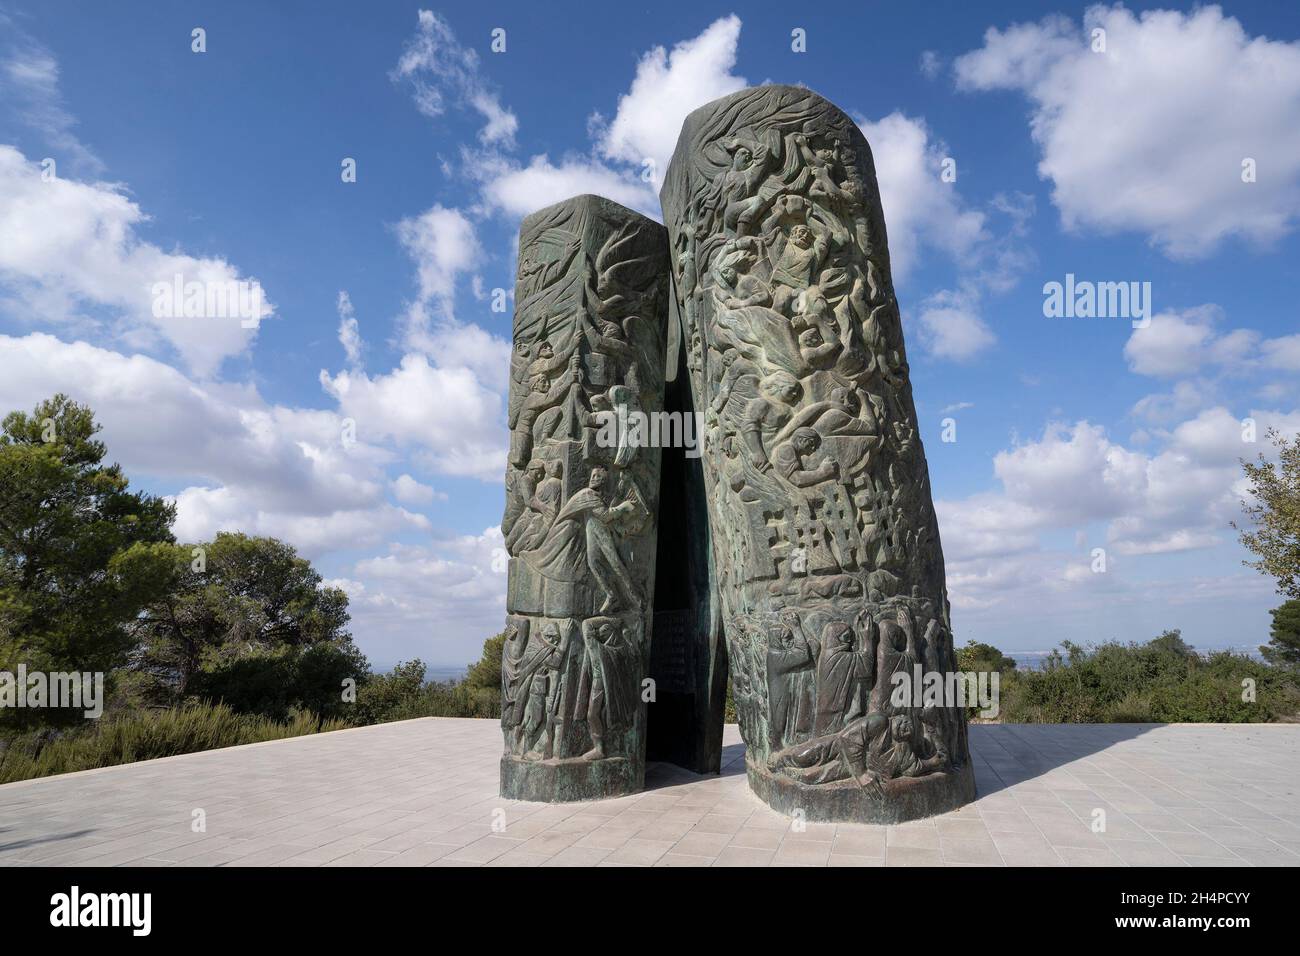 Judea mountains, Israel - October 10th, 2021: The ' Scroll of Fire ' bronze holocaust memorial, in the Judea mountains, near Jerusalem, Israel. Stock Photo